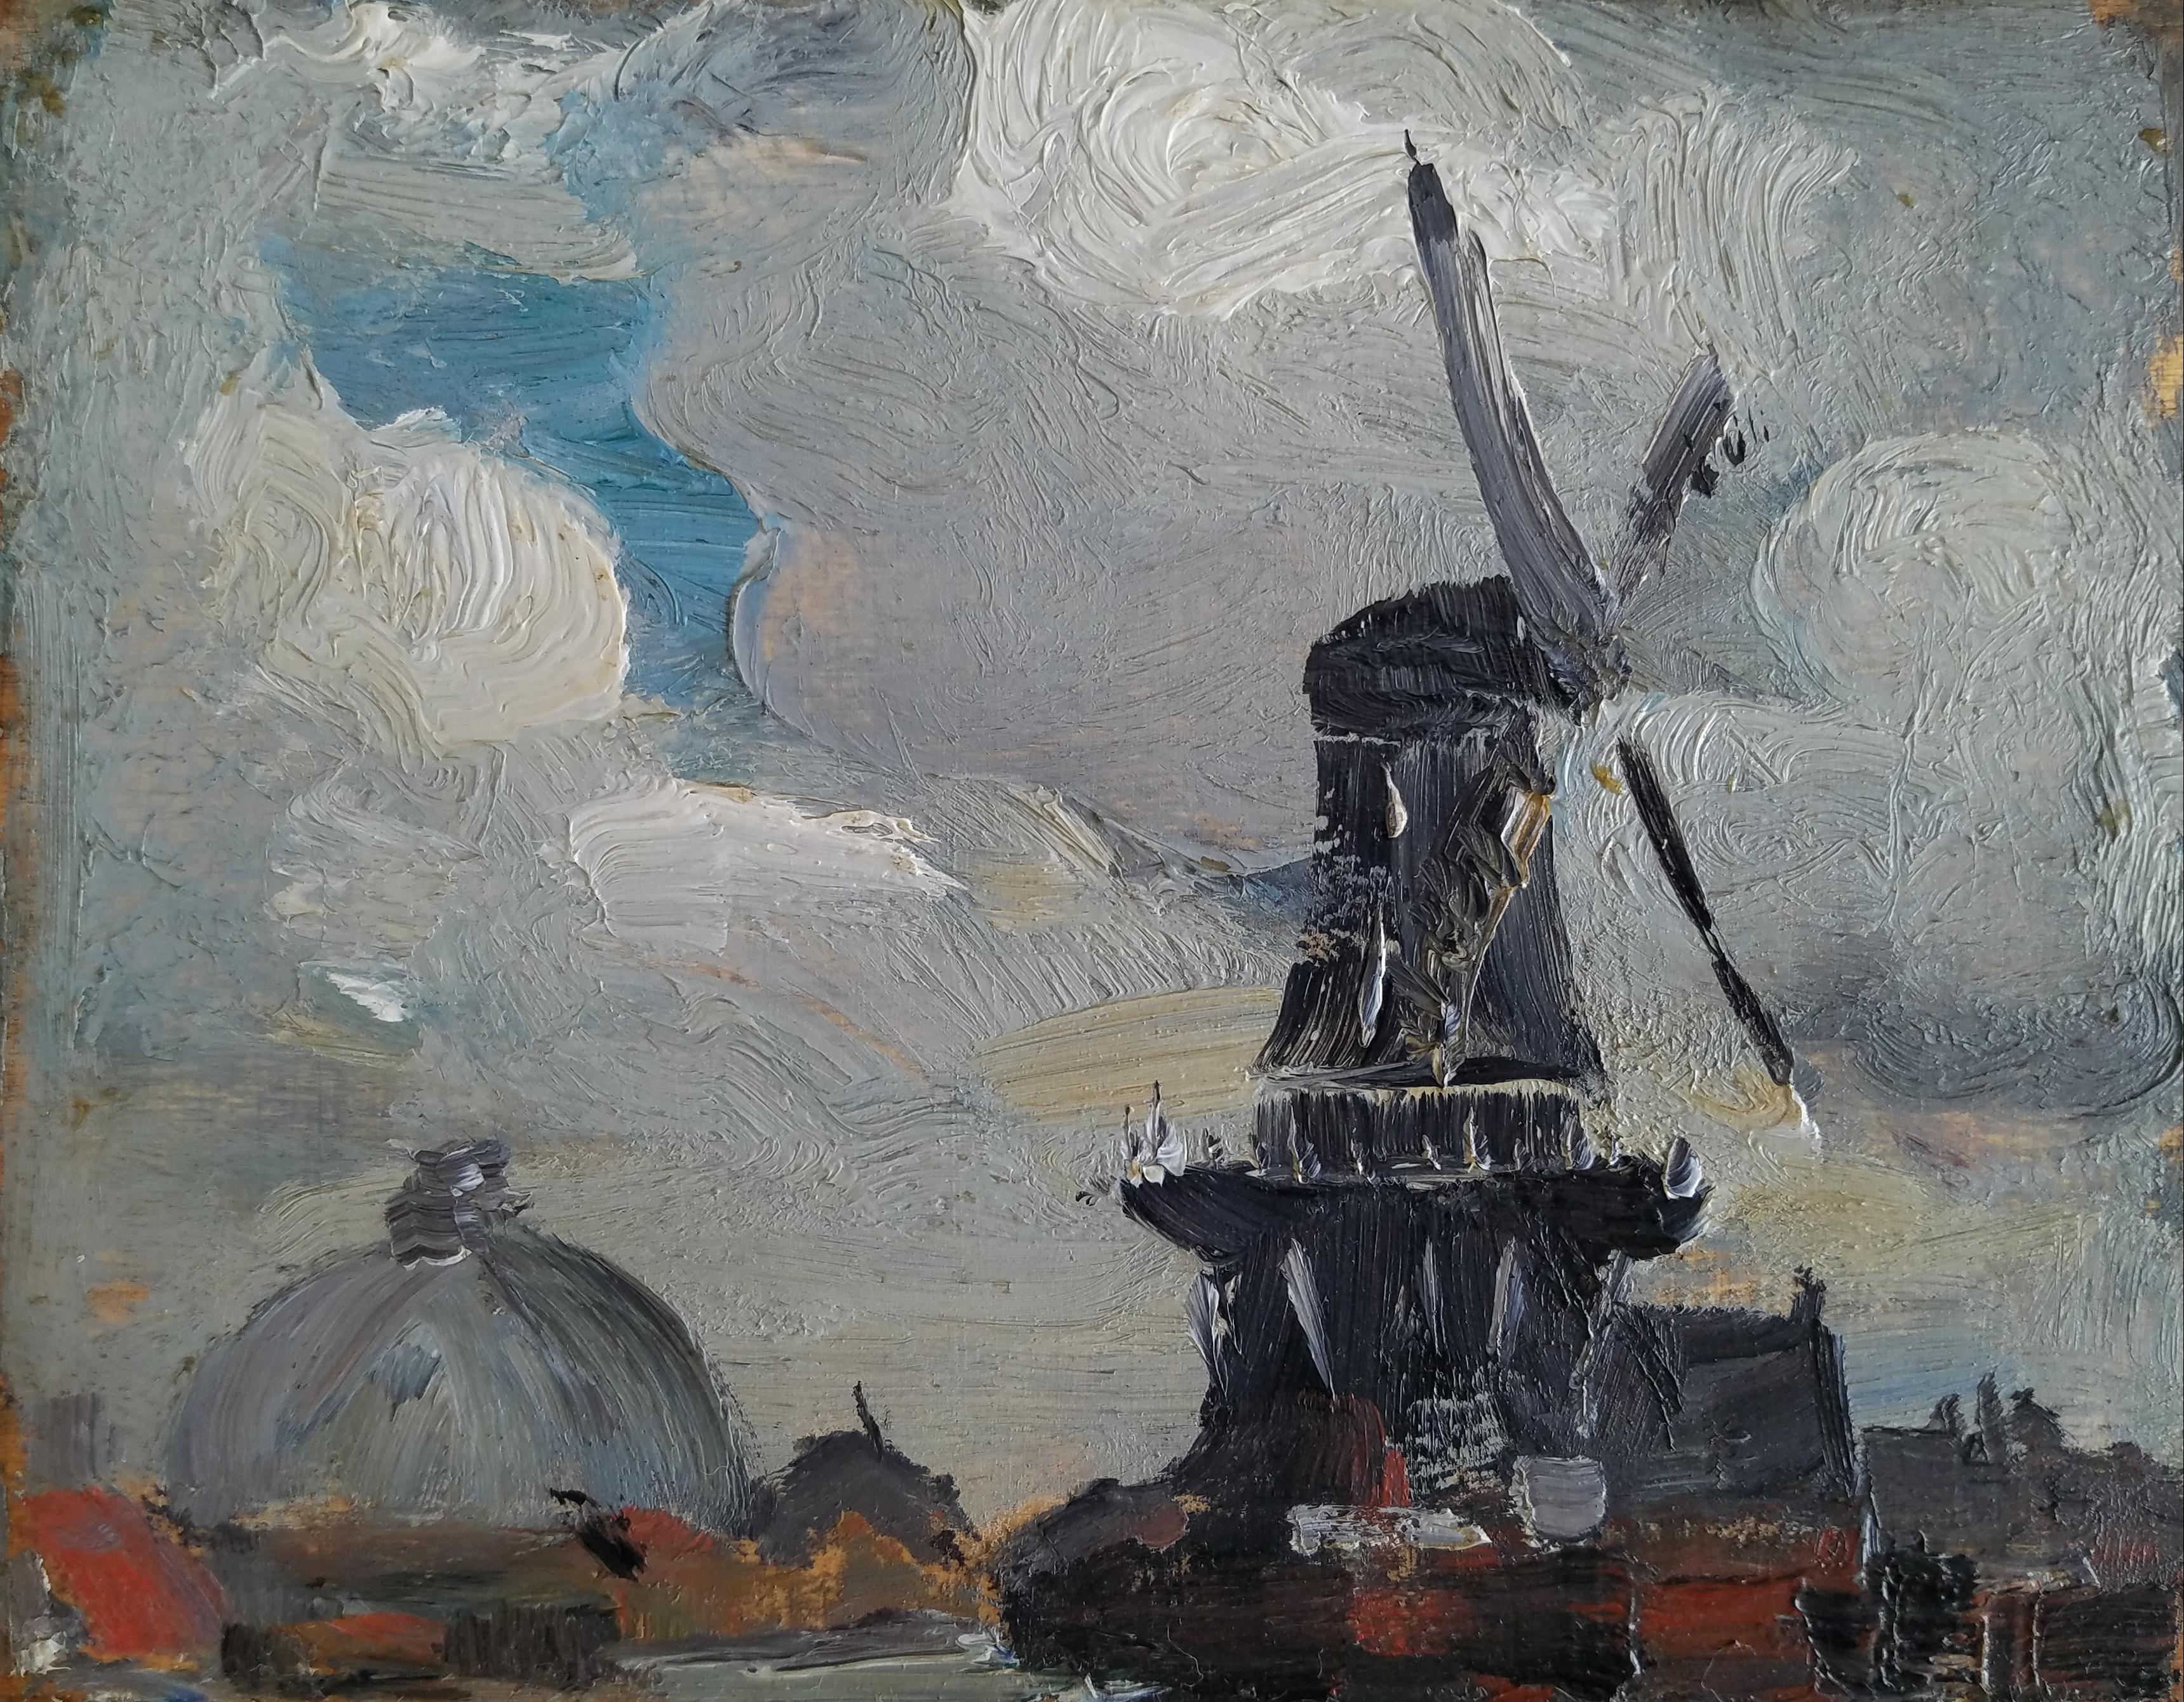 Robert Cozad Henri (1865 - 1929)
Haarlem Windmill, Holland, 1907
Oil on panel
5 x 6 1/2 inches
Signed, titled, and dated on the reverse

Provenance:
Collection of Ezra & Cecile Zilkha

Listed in the Robert Henri account book as no. 103E.

Born